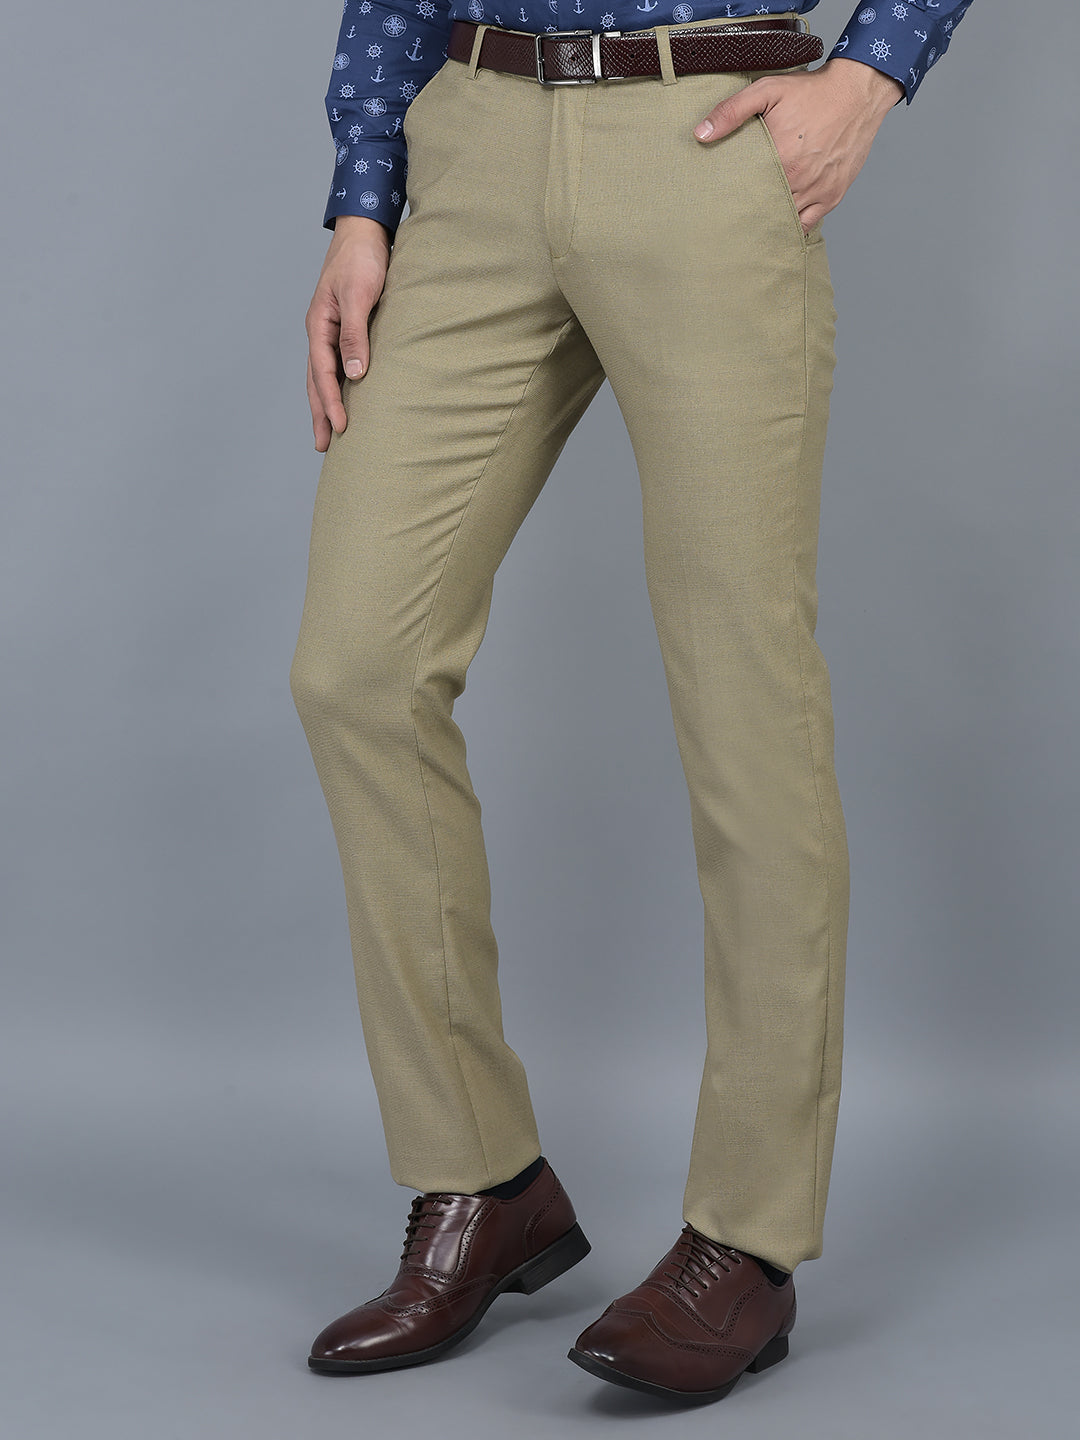 Buy Peter England Men Neo Slim Fit Checked Trousers - Trousers for Men  22245744 | Myntra